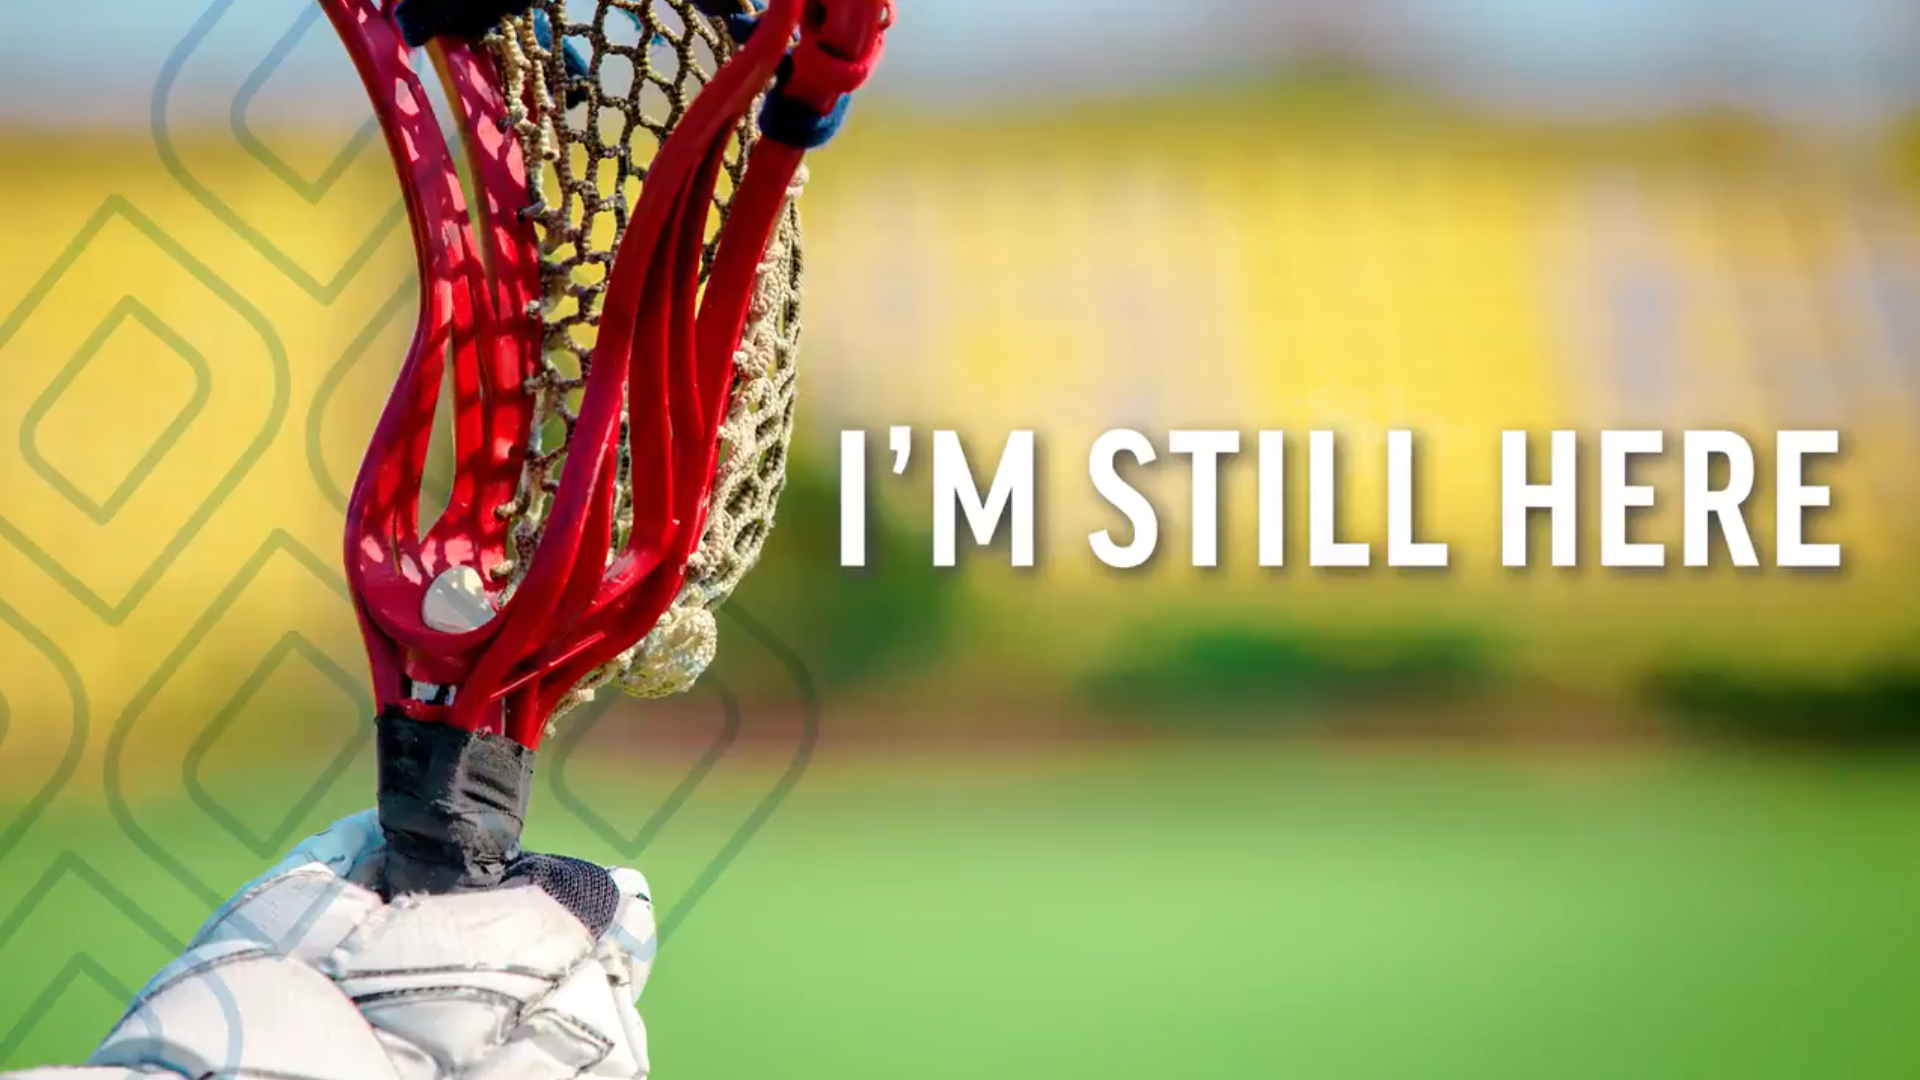 World Lacrosse publishes "I'm Still Here" video to offer hope and reassurance